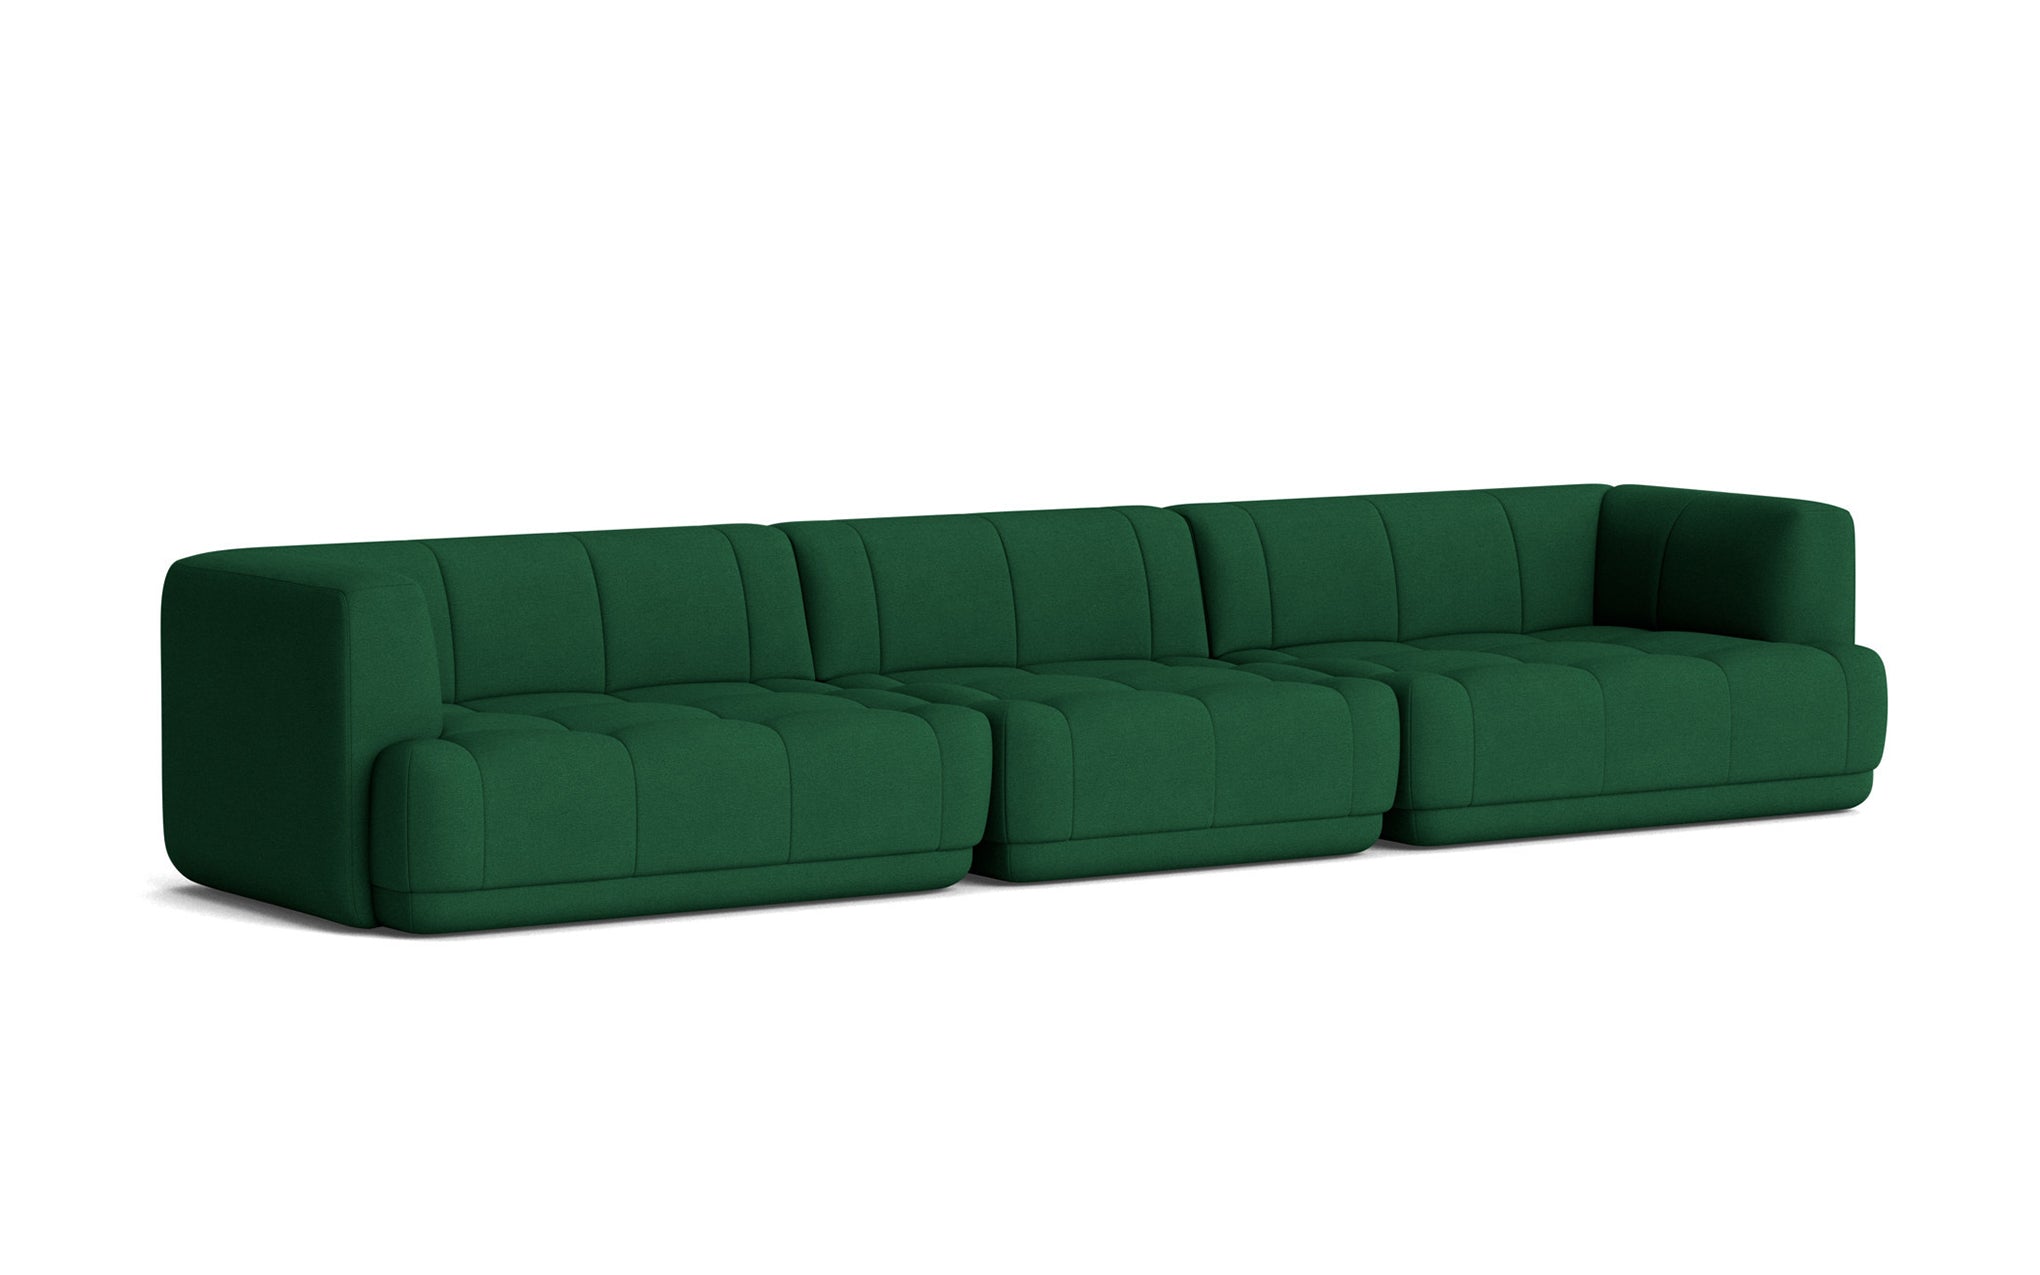 Quilton sofa combination 2 by Doshi Levien for HAY - SCP